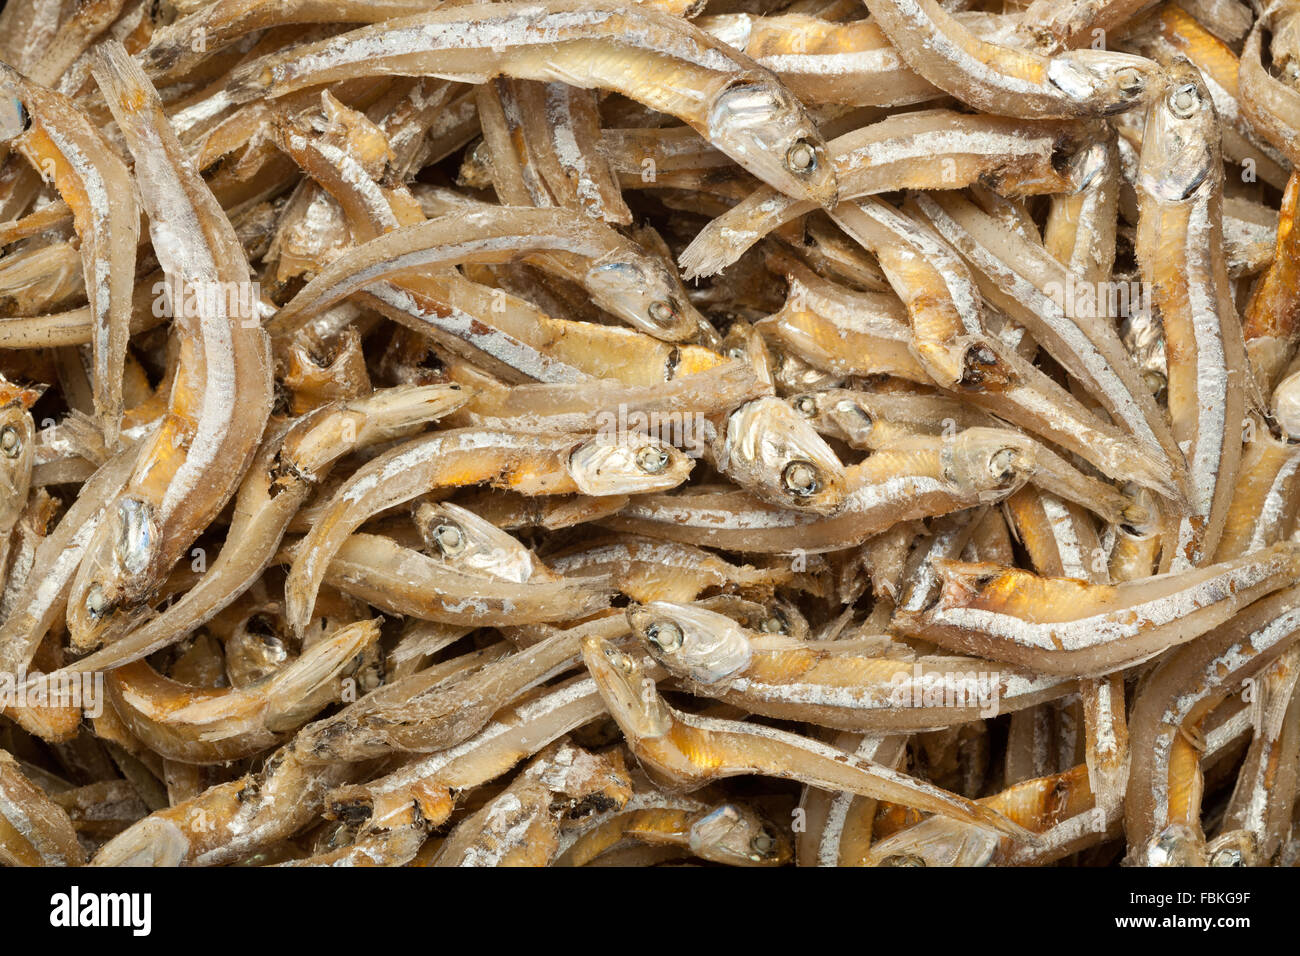 Closeup of lots of dried anchovies Stock Photo